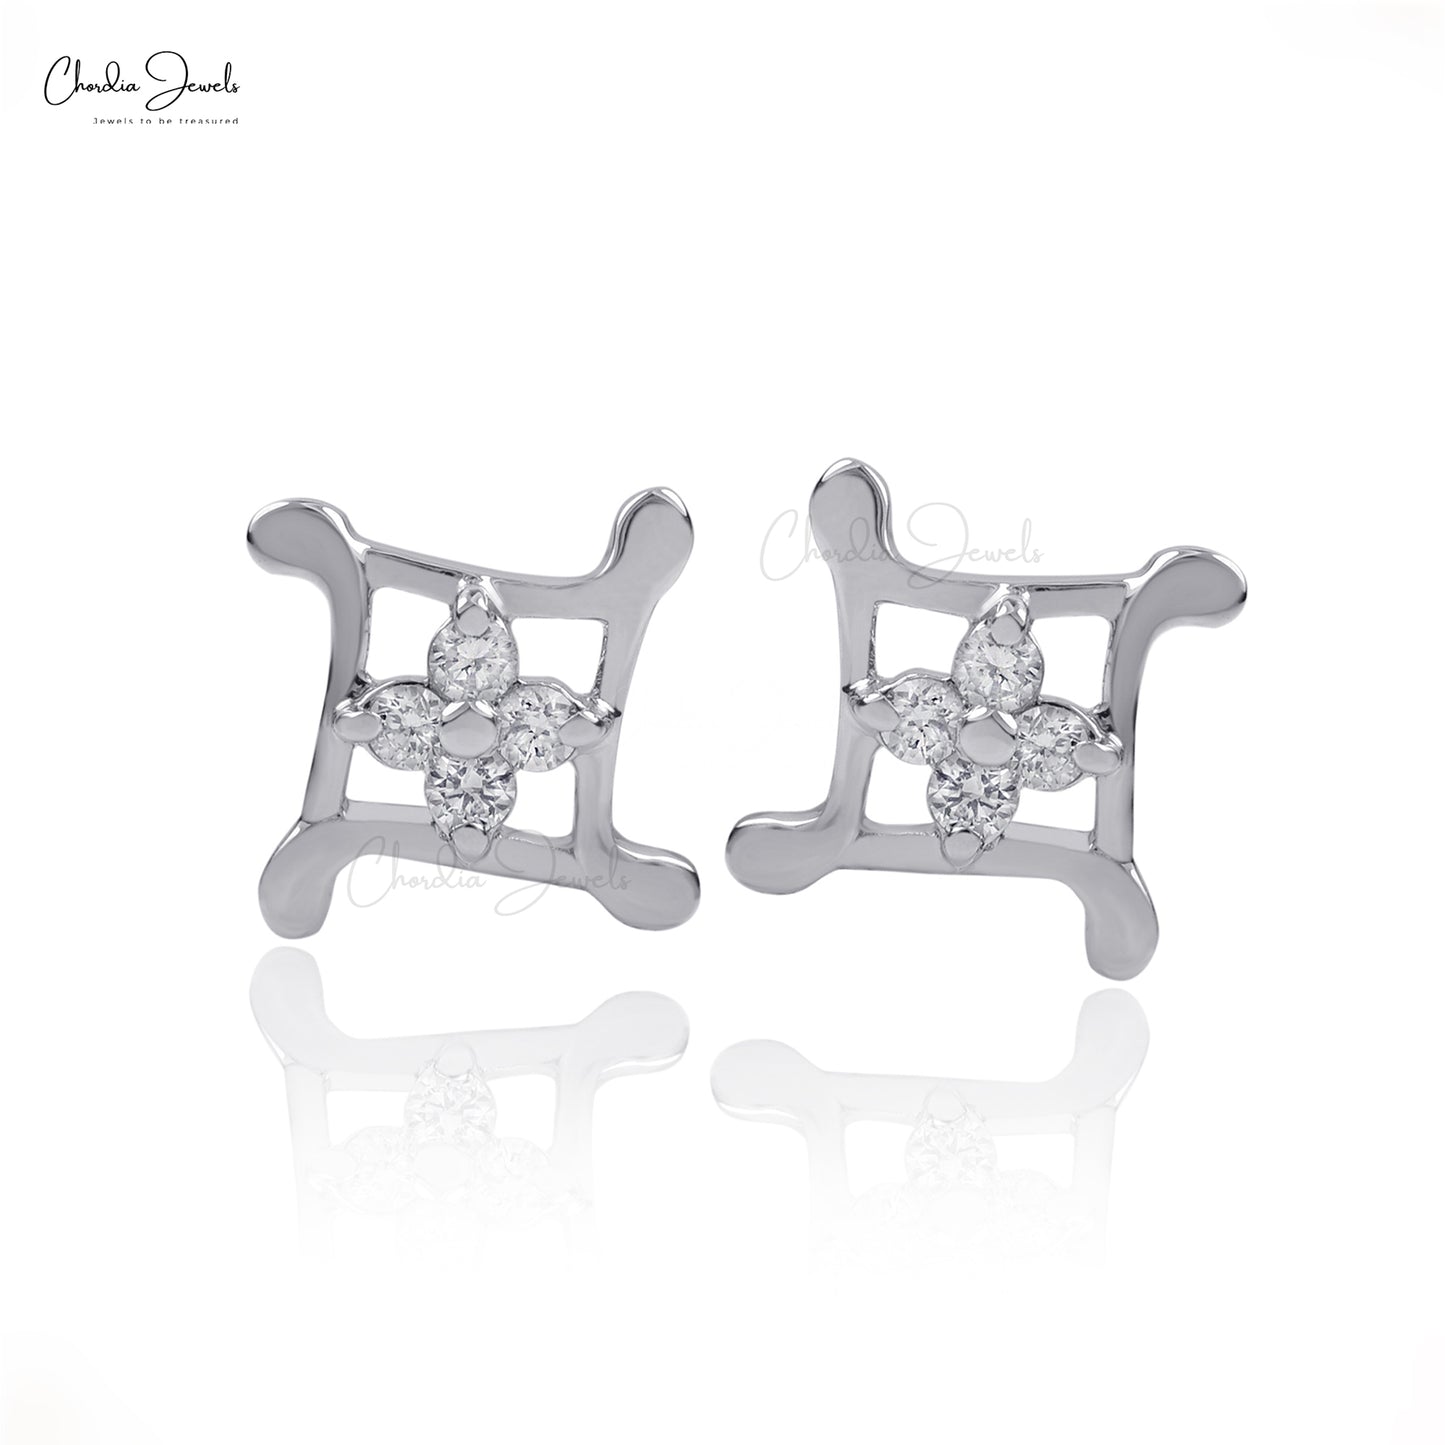 Adorn yourself with these diamond stud earrings.